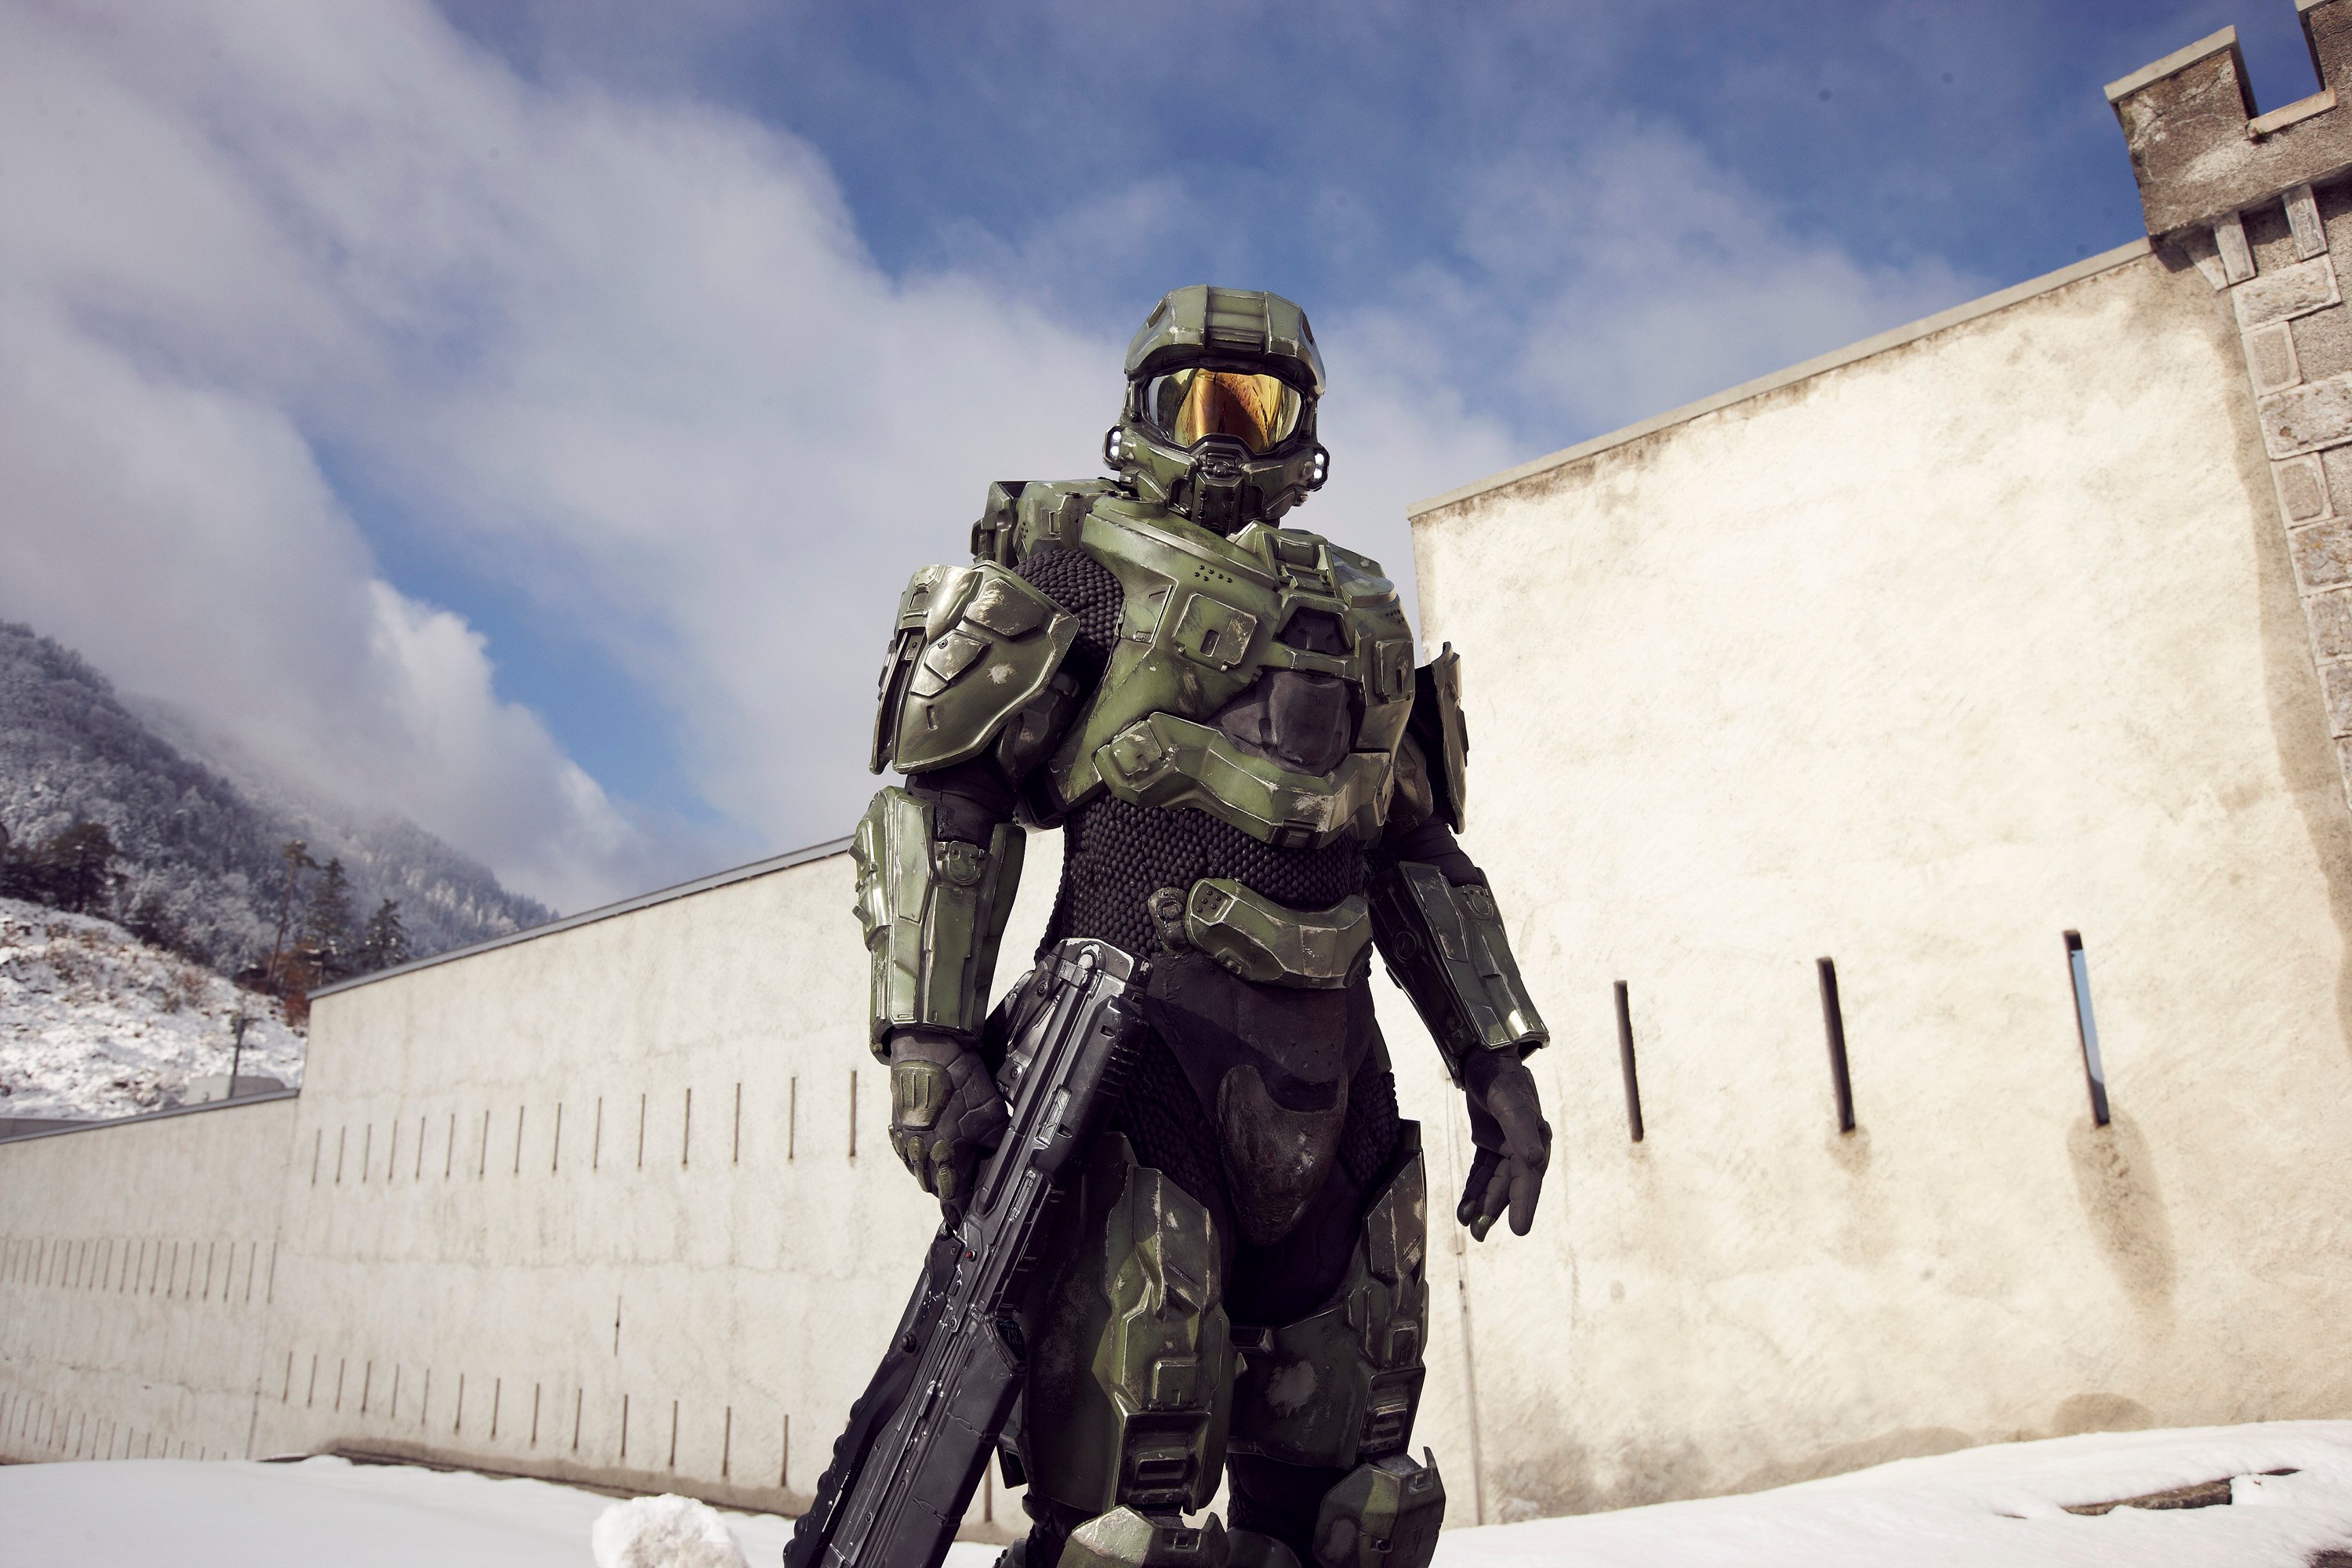 Halo Master Chief holds his gun at his side